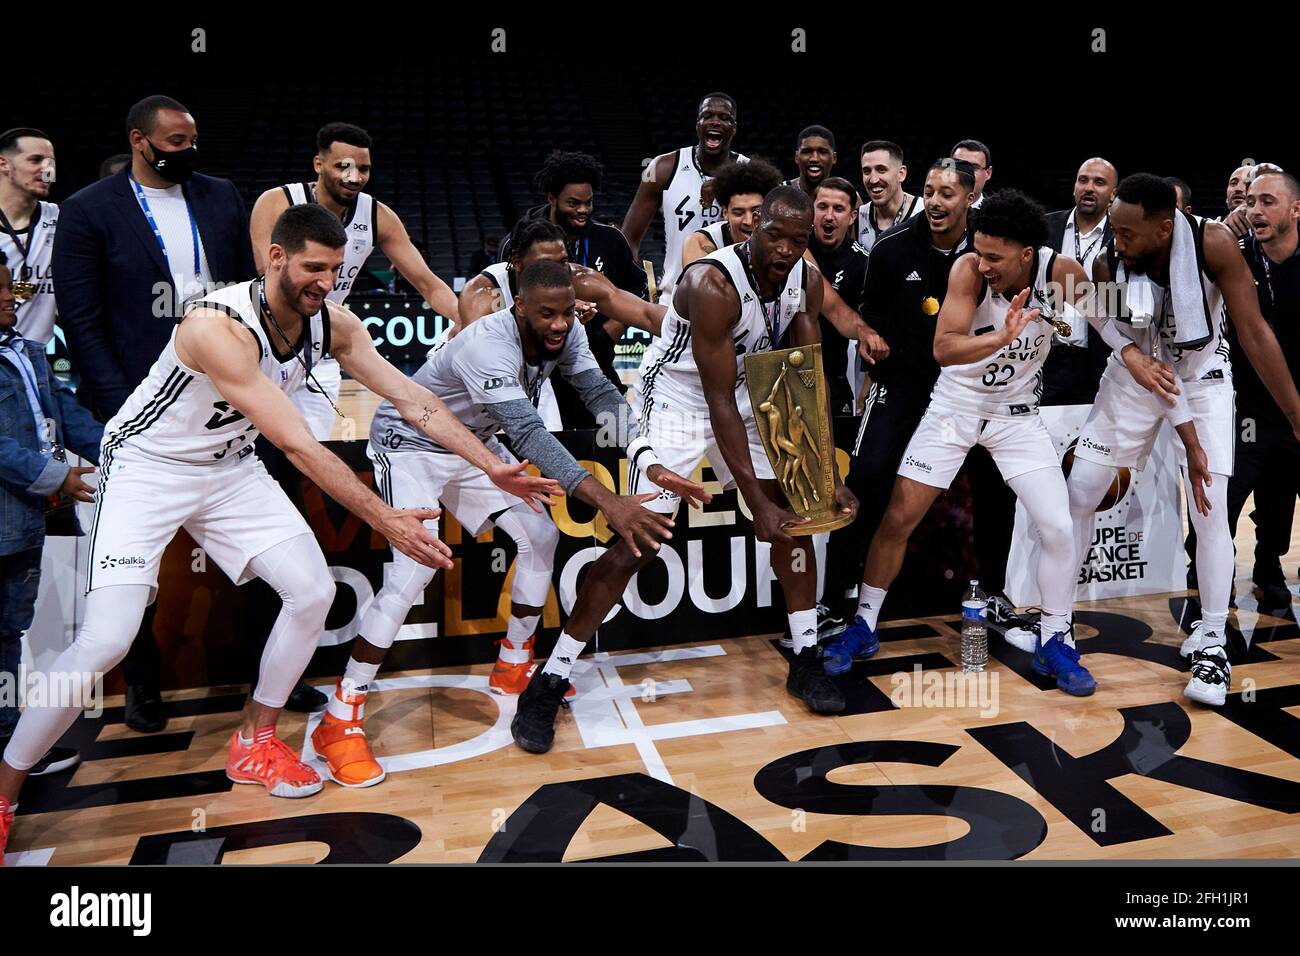 Paris, France. 24th Apr, 2021. Winner Team of ASVEL, Lyon-Villeurbanne  during the French Cup, Final basketball match between JDA Dijon and LDLC  ASVEL on April 24, 2021 at AccorHotels Arena in Paris,